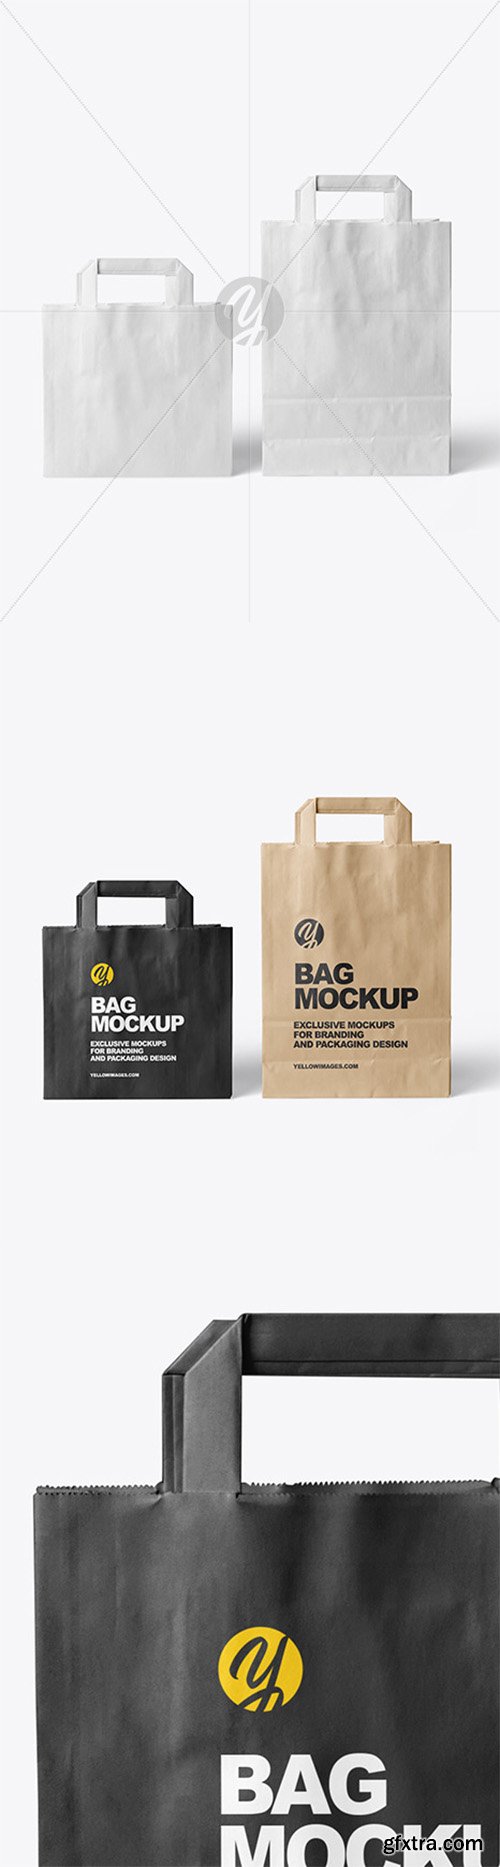 Two Paper Bags 51769